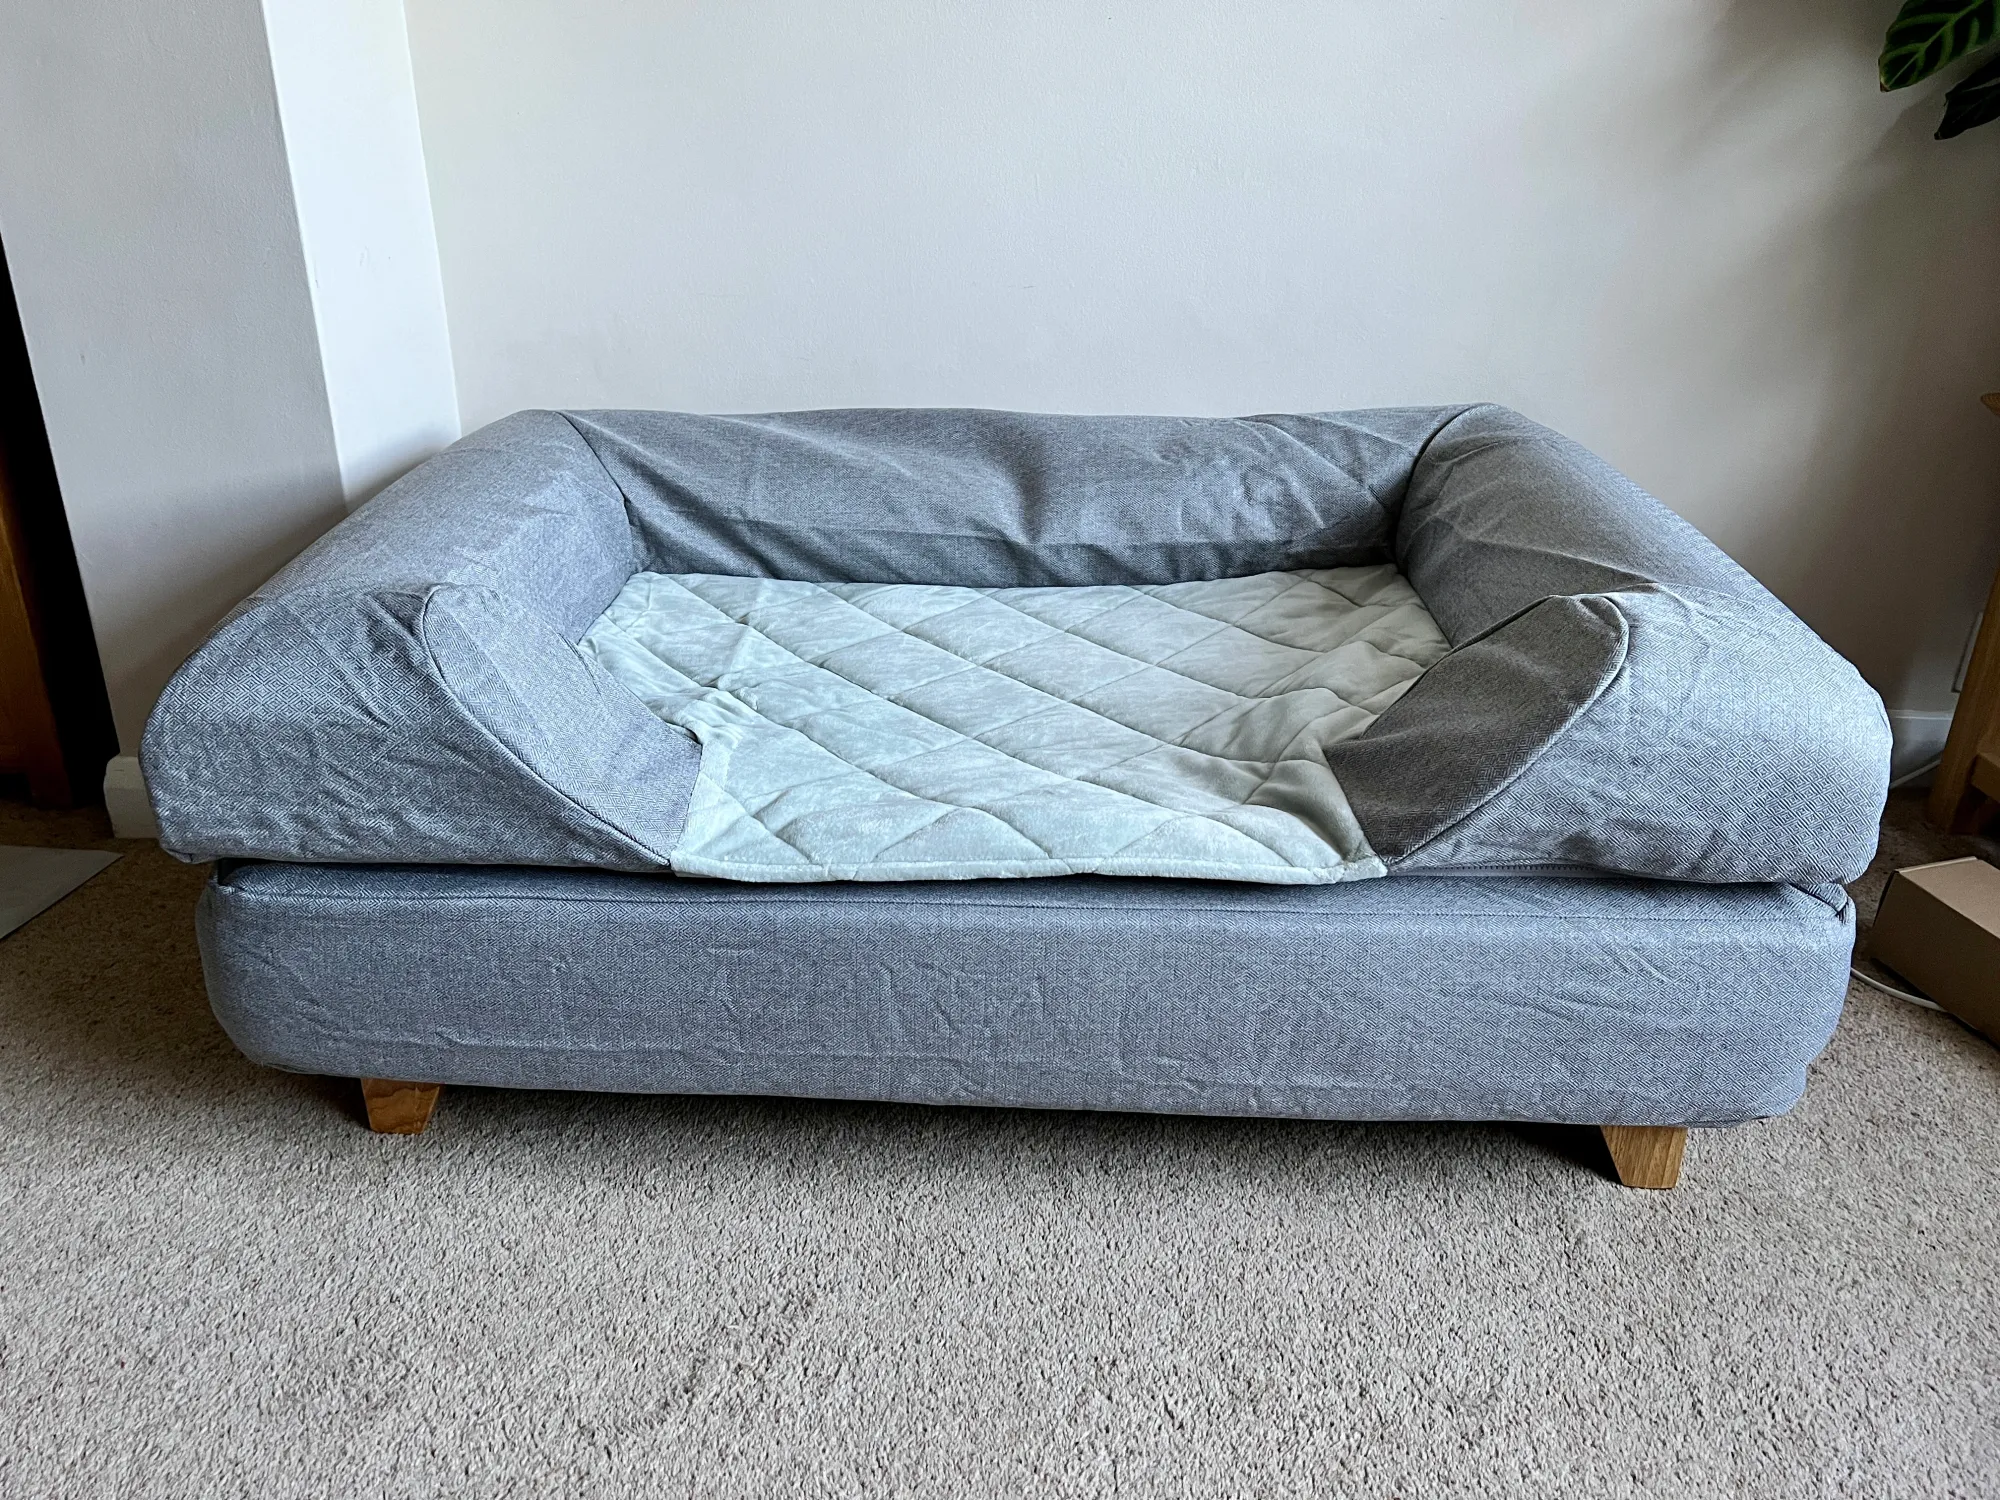 Omlet Topology Luxury Dog Bed Review